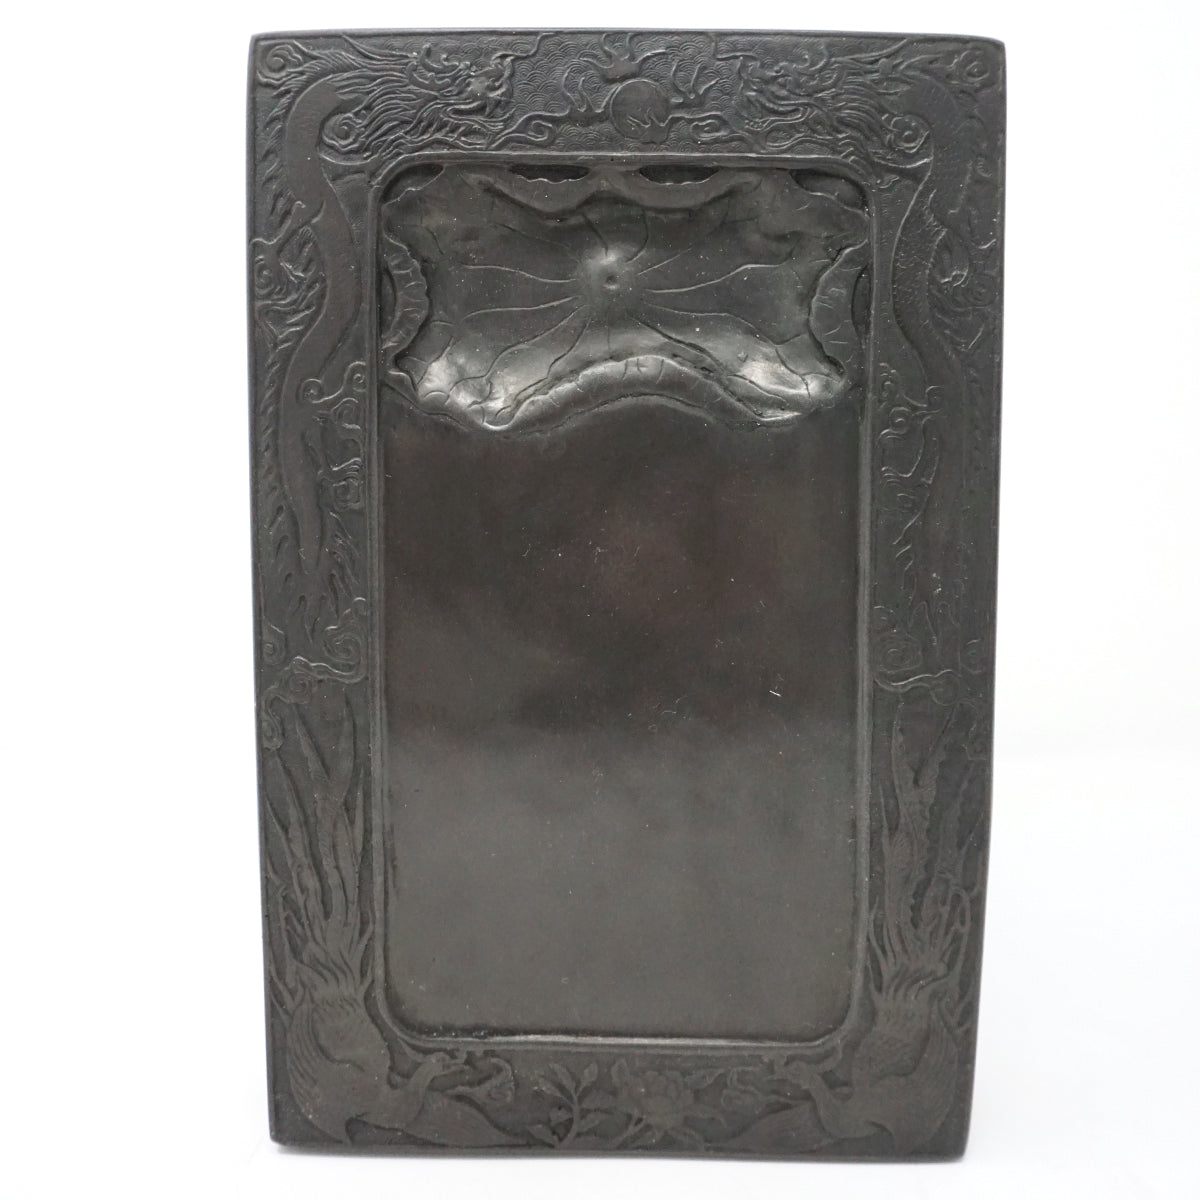 Chinese Ink Stone with Dragon and Letters Design